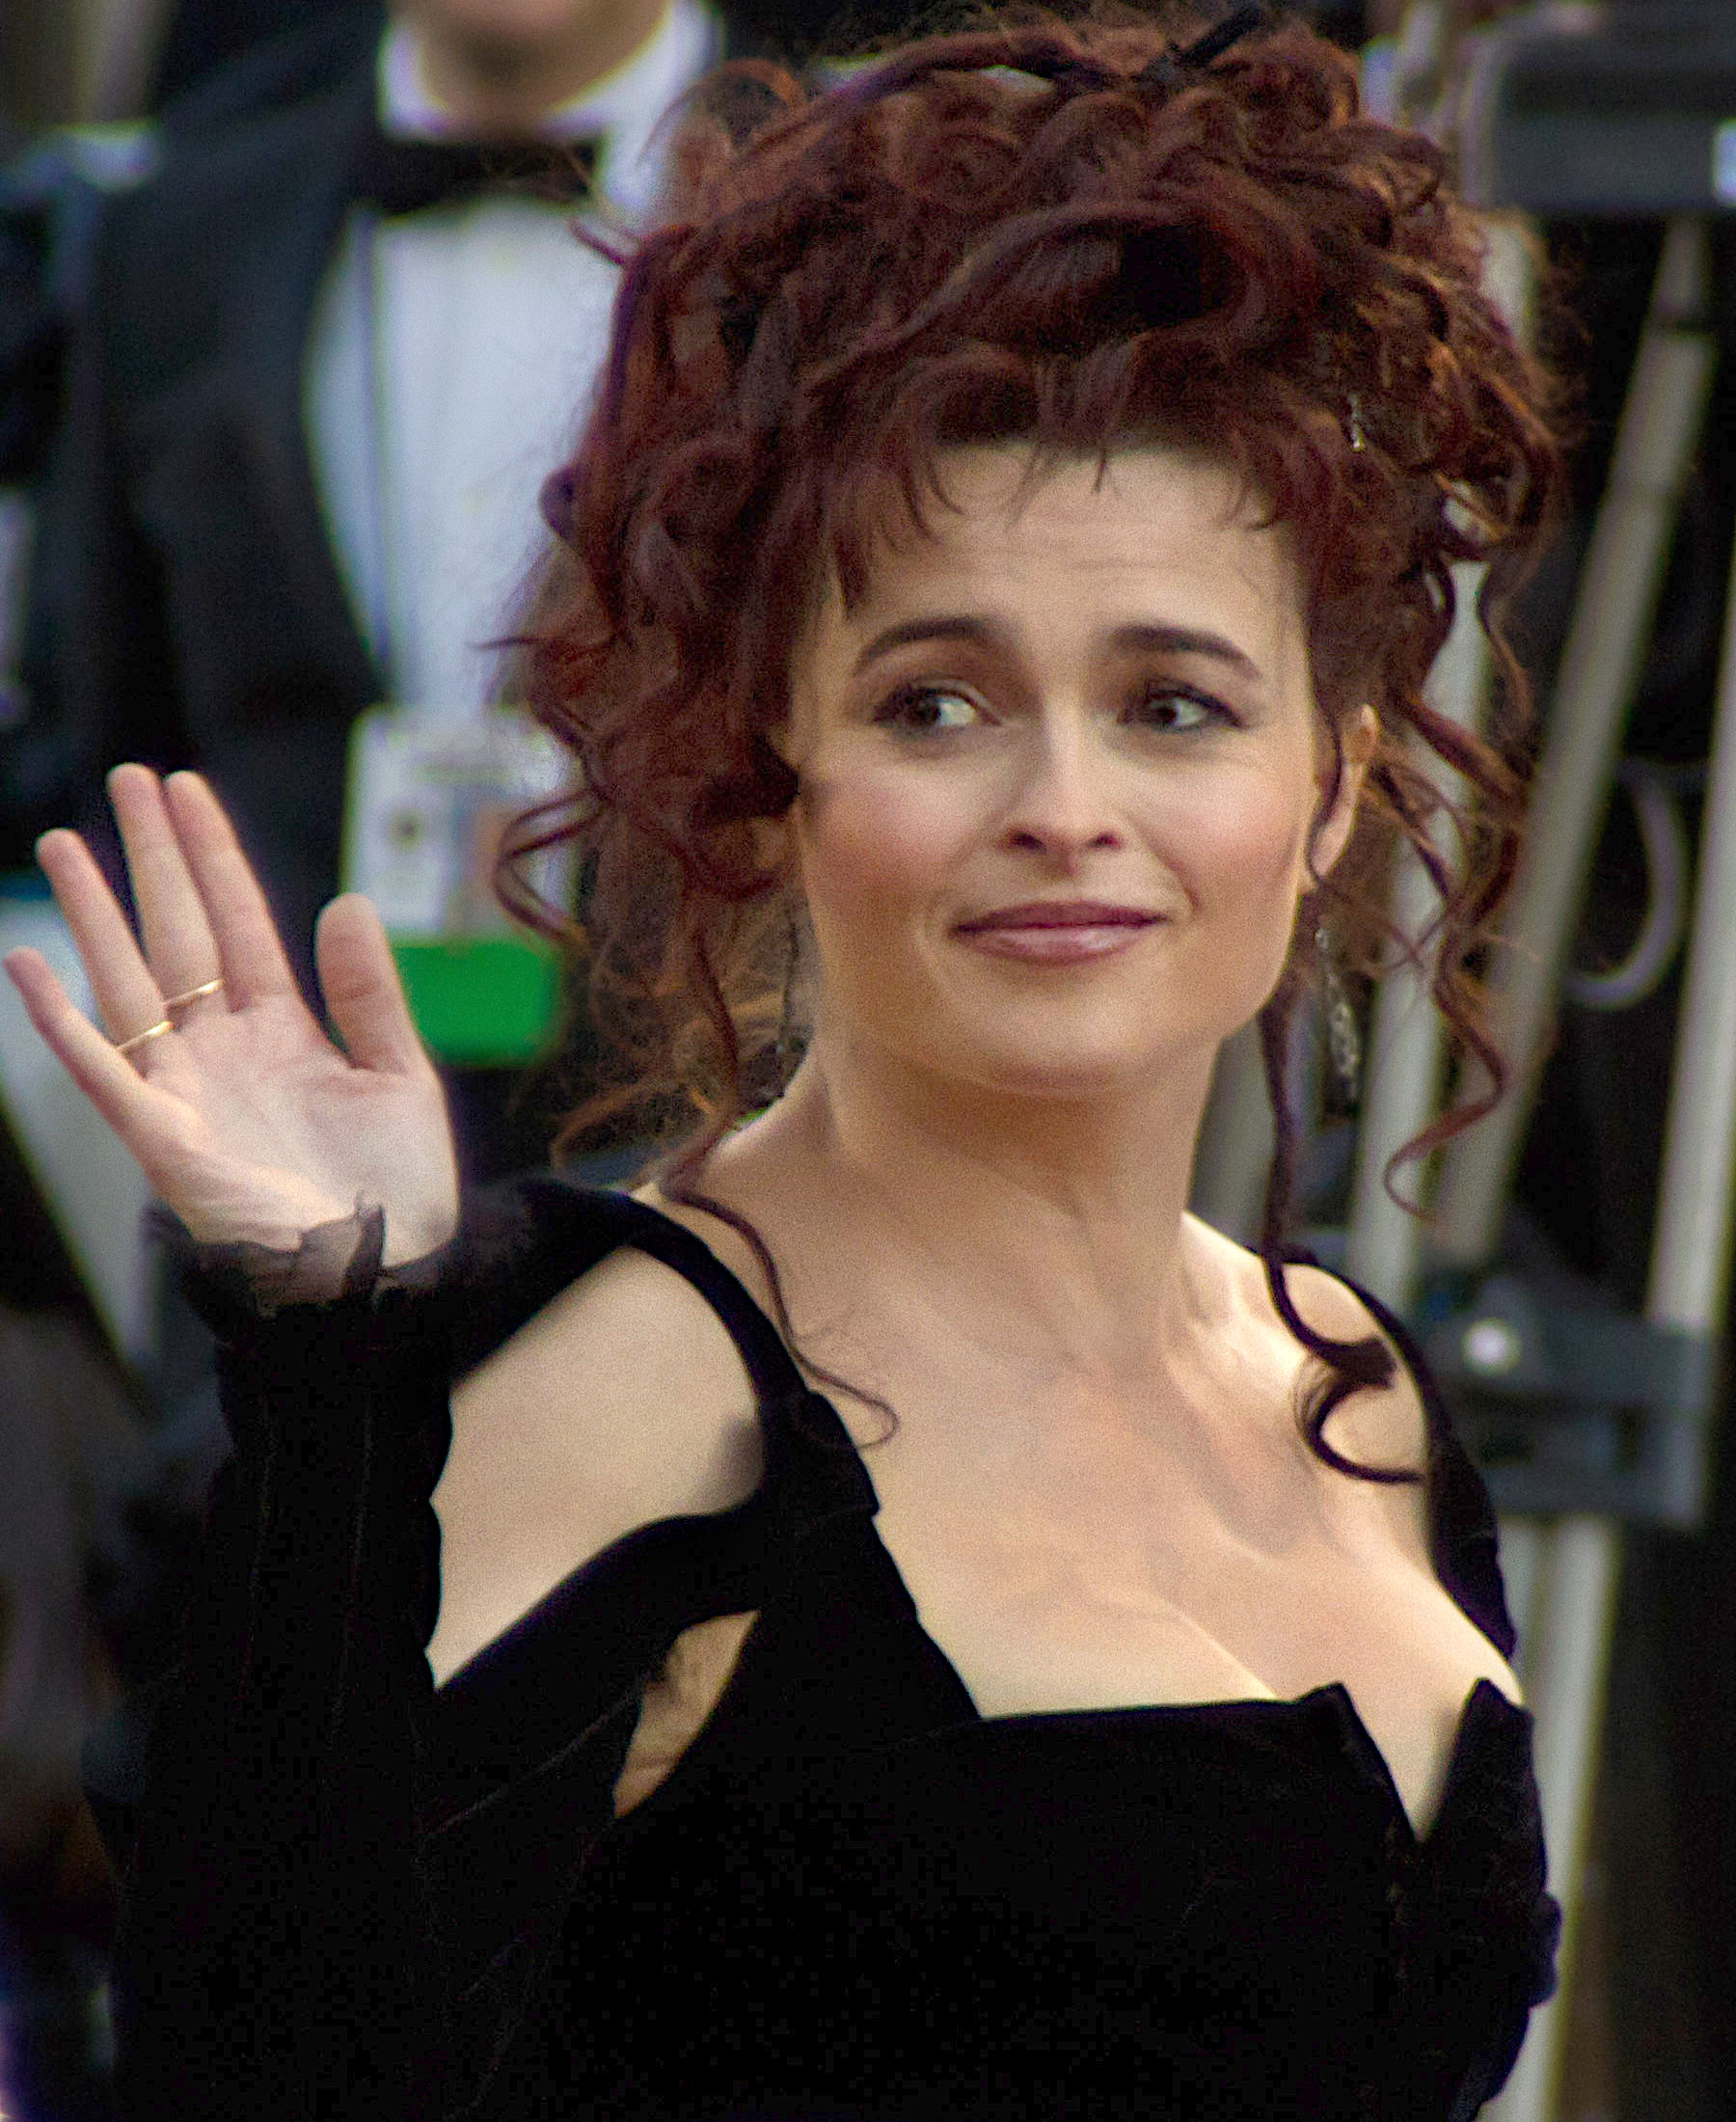 Who played Bellatrix Lestrange in the Harry Potter series?